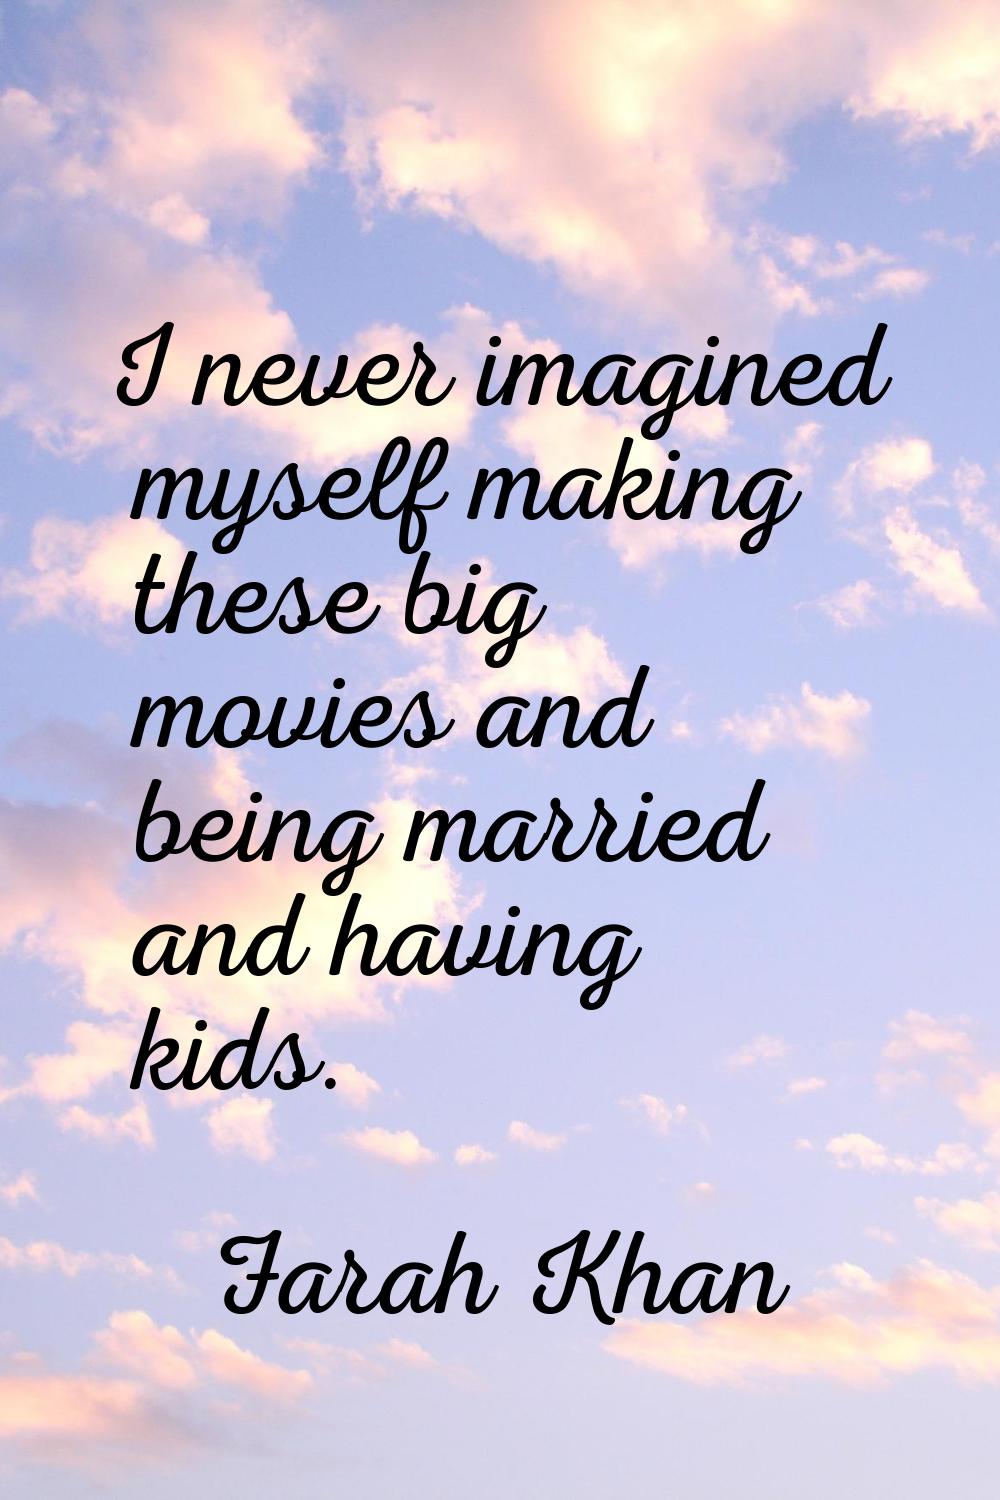 I never imagined myself making these big movies and being married and having kids.